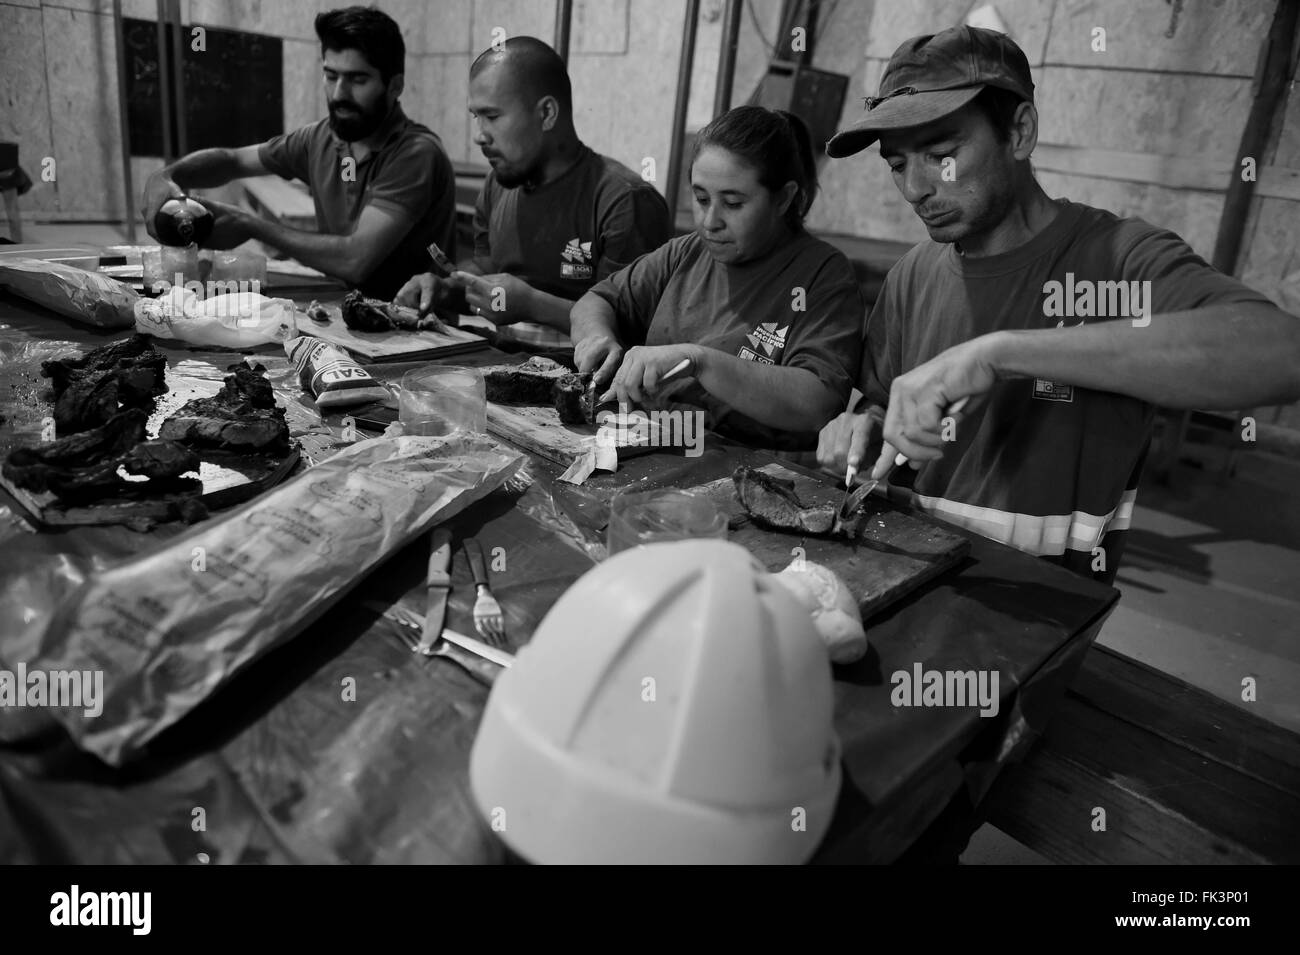 (160307) -- MONTEVIDEO, March 7, 2016 (Xinhua) -- Claudia Barreto has a lunch with her colleagues during their break at a factory in Montevideo, capital of Uruguay, on March 4, 2016. Claudia, 44 years old, is the mother of 5 children and works as construction bricklayer since 2008 to support her family. She is the only female at a factory with about 50 workers and has the similar workload with others. According to the new added clauses in documents of the Only National Union of Construction and Annexes (SUNCA), companies are required to hire more female staff. The International Women's Day is Stock Photo